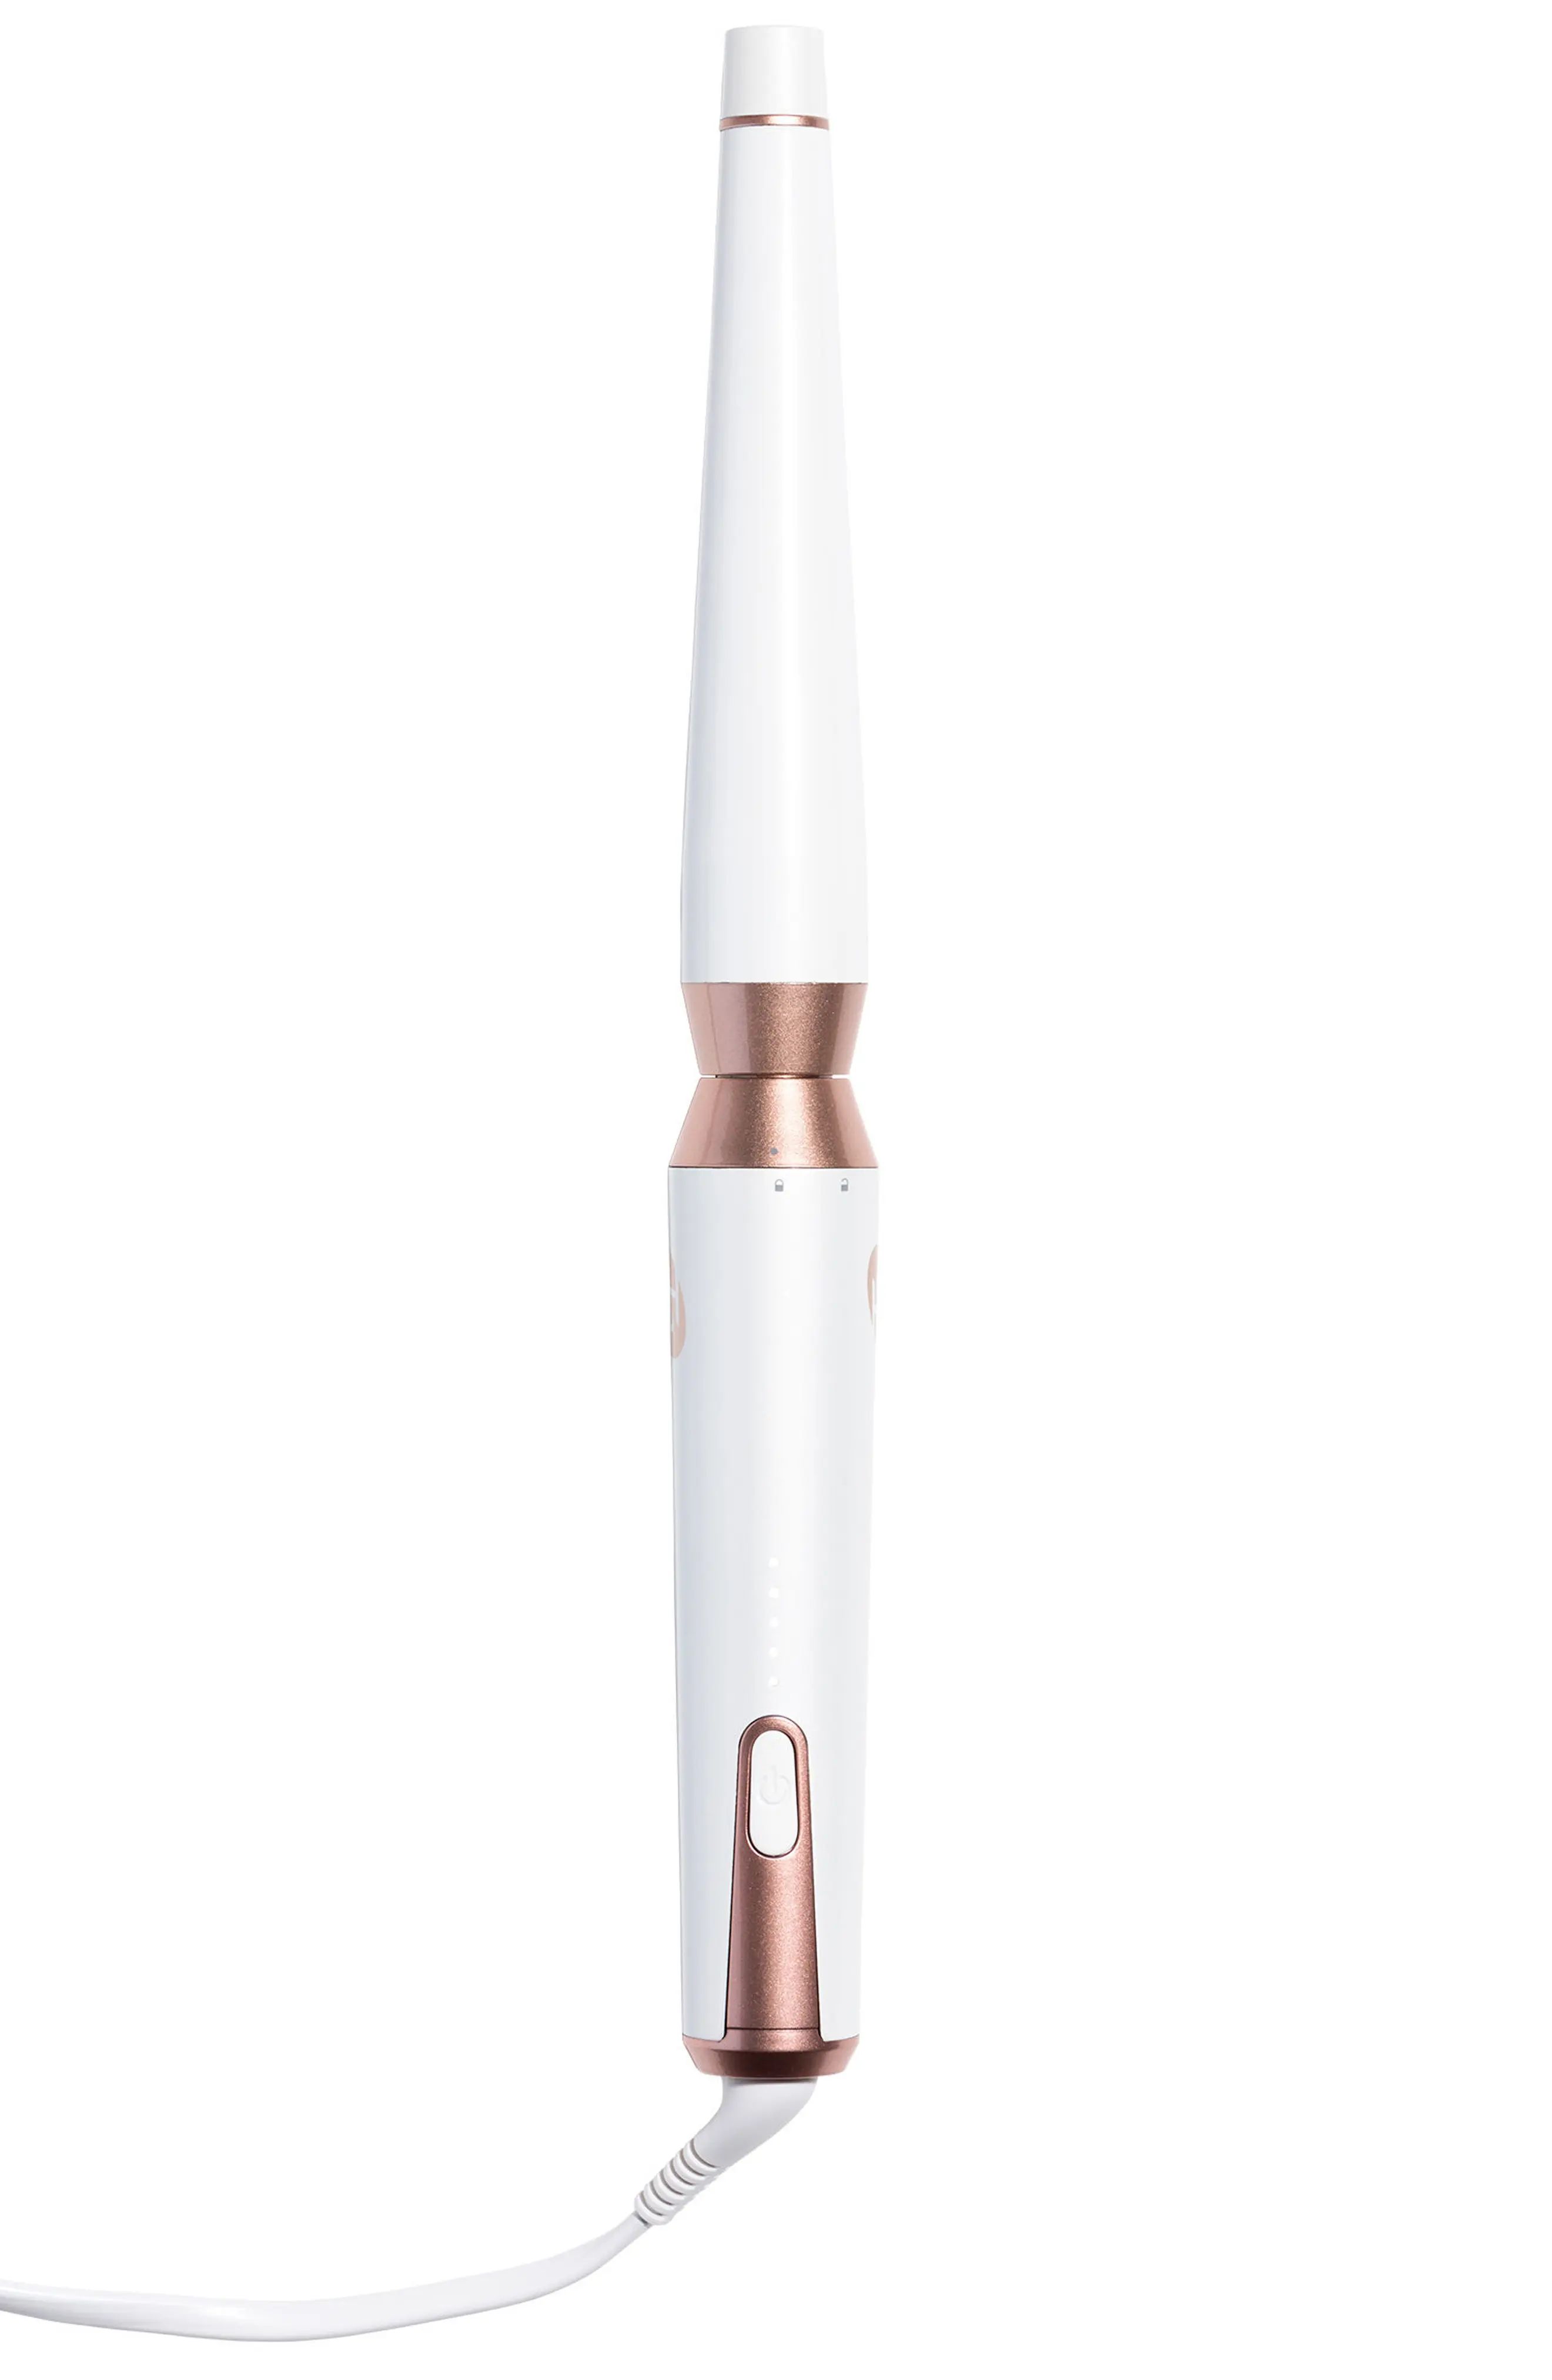 T3 Whirl Convertible Styling Wand with Interchangeable Tapered Barrel | Nordstrom